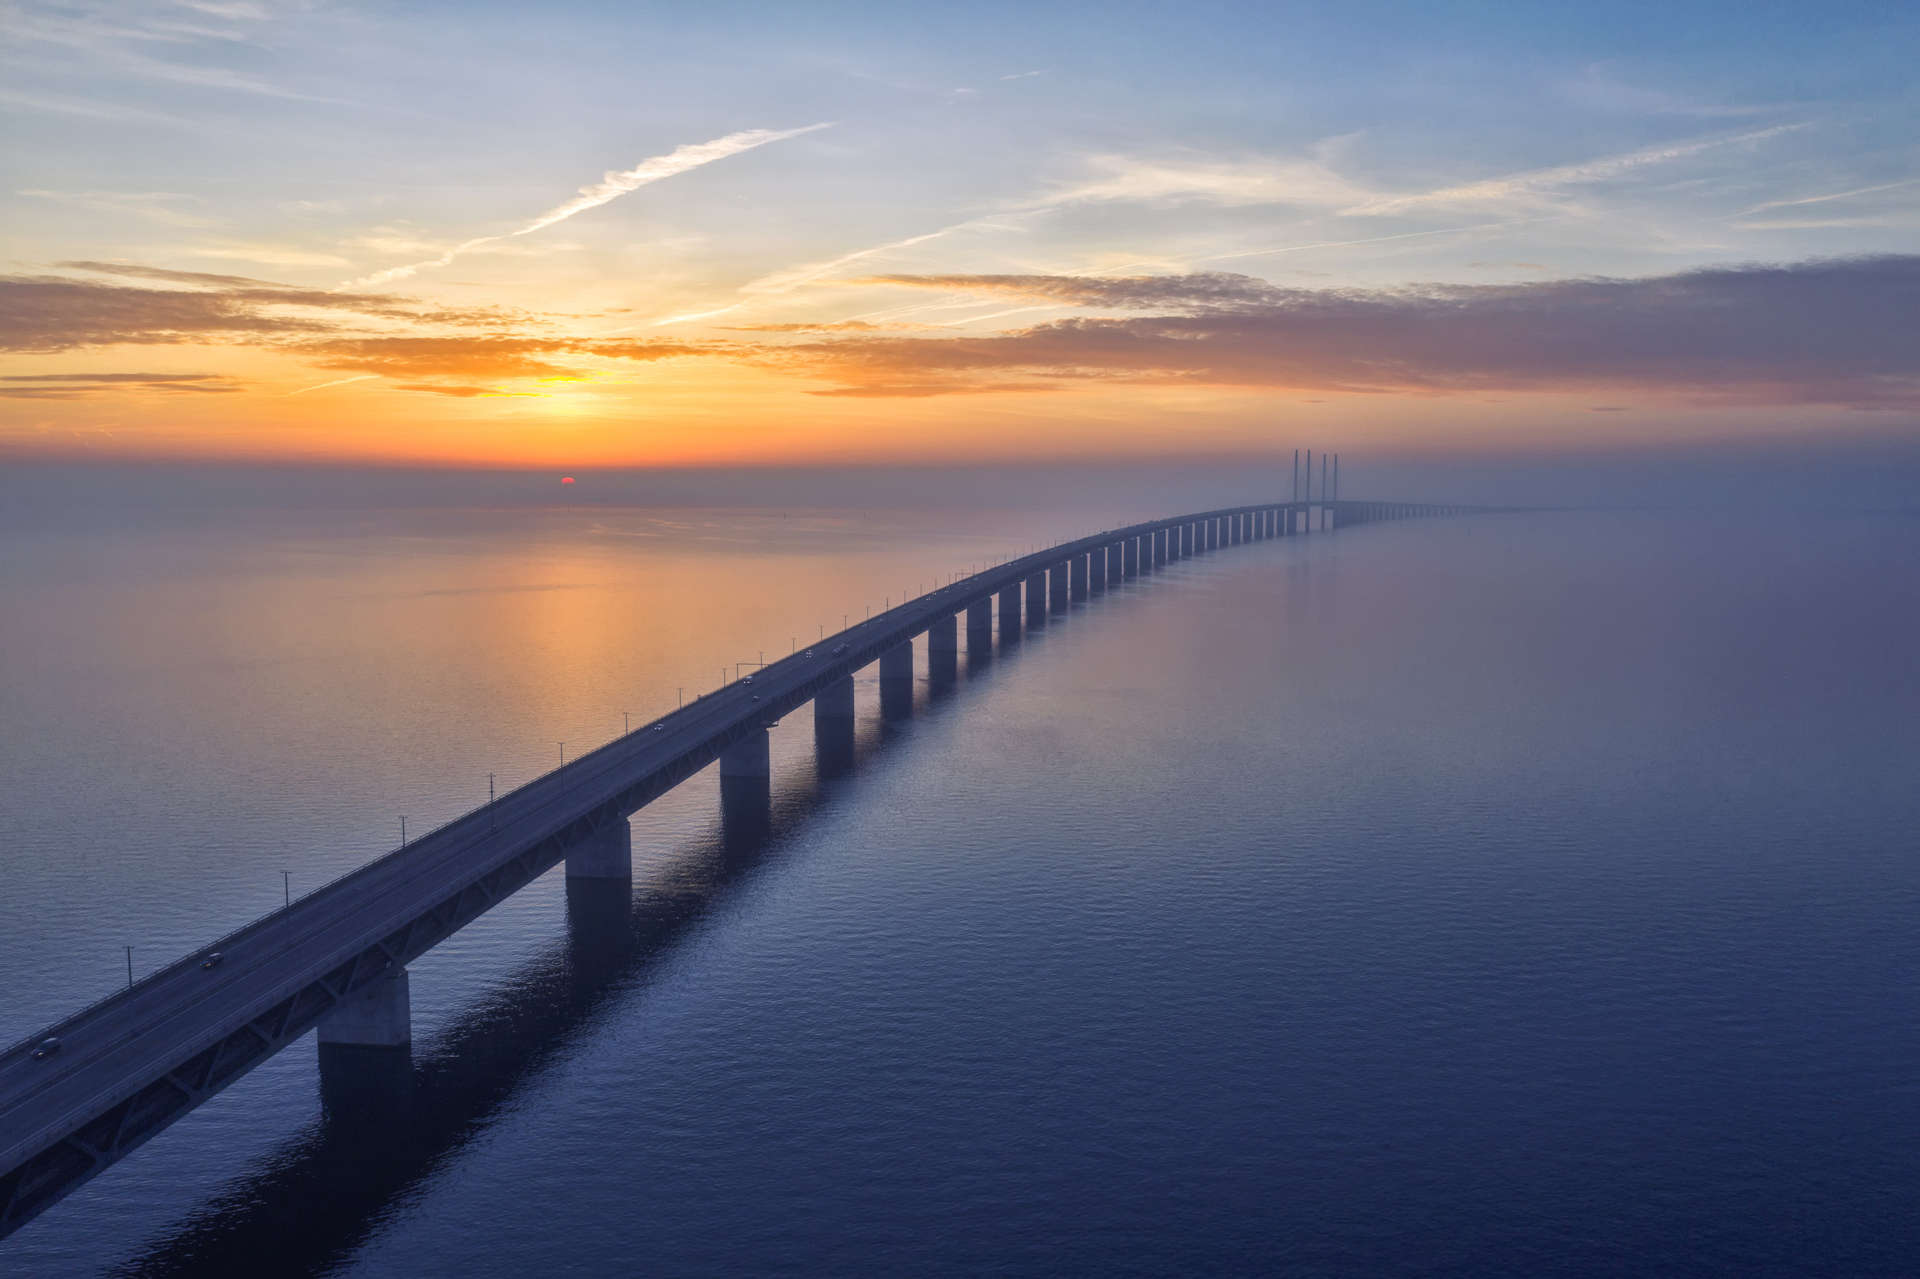 Drive into Sweden from Denmark by taking the magnificent, five-miles-long Øresund Bridge